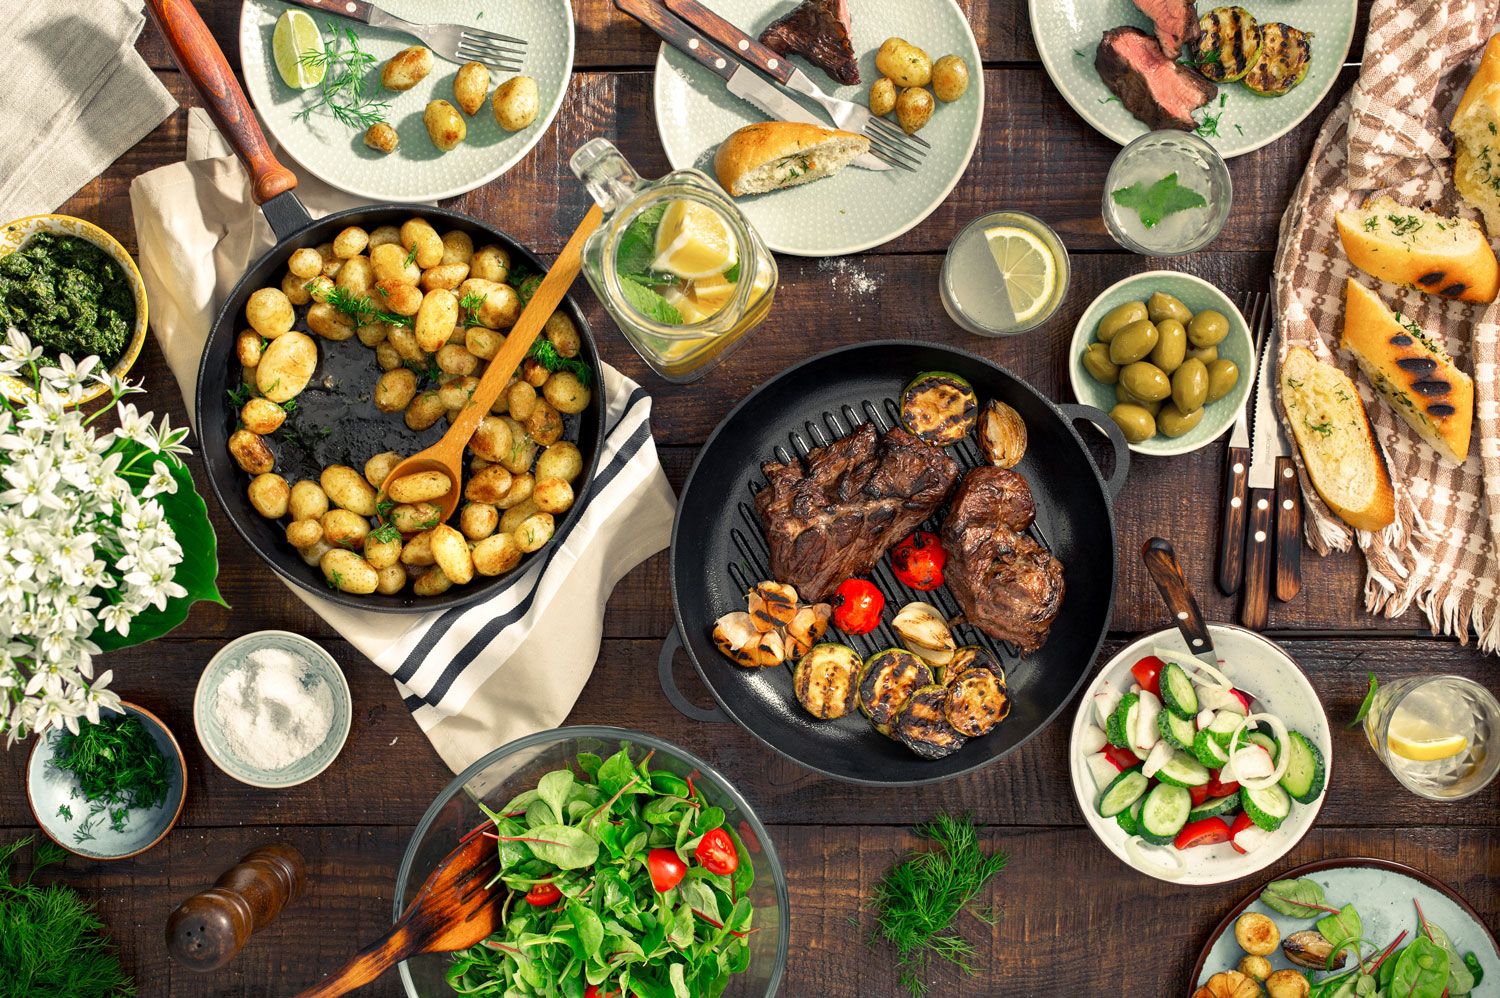 Dinner table with a spread of different foods such as grilled steak, potatoes, salad and bread sitting on a brown table.